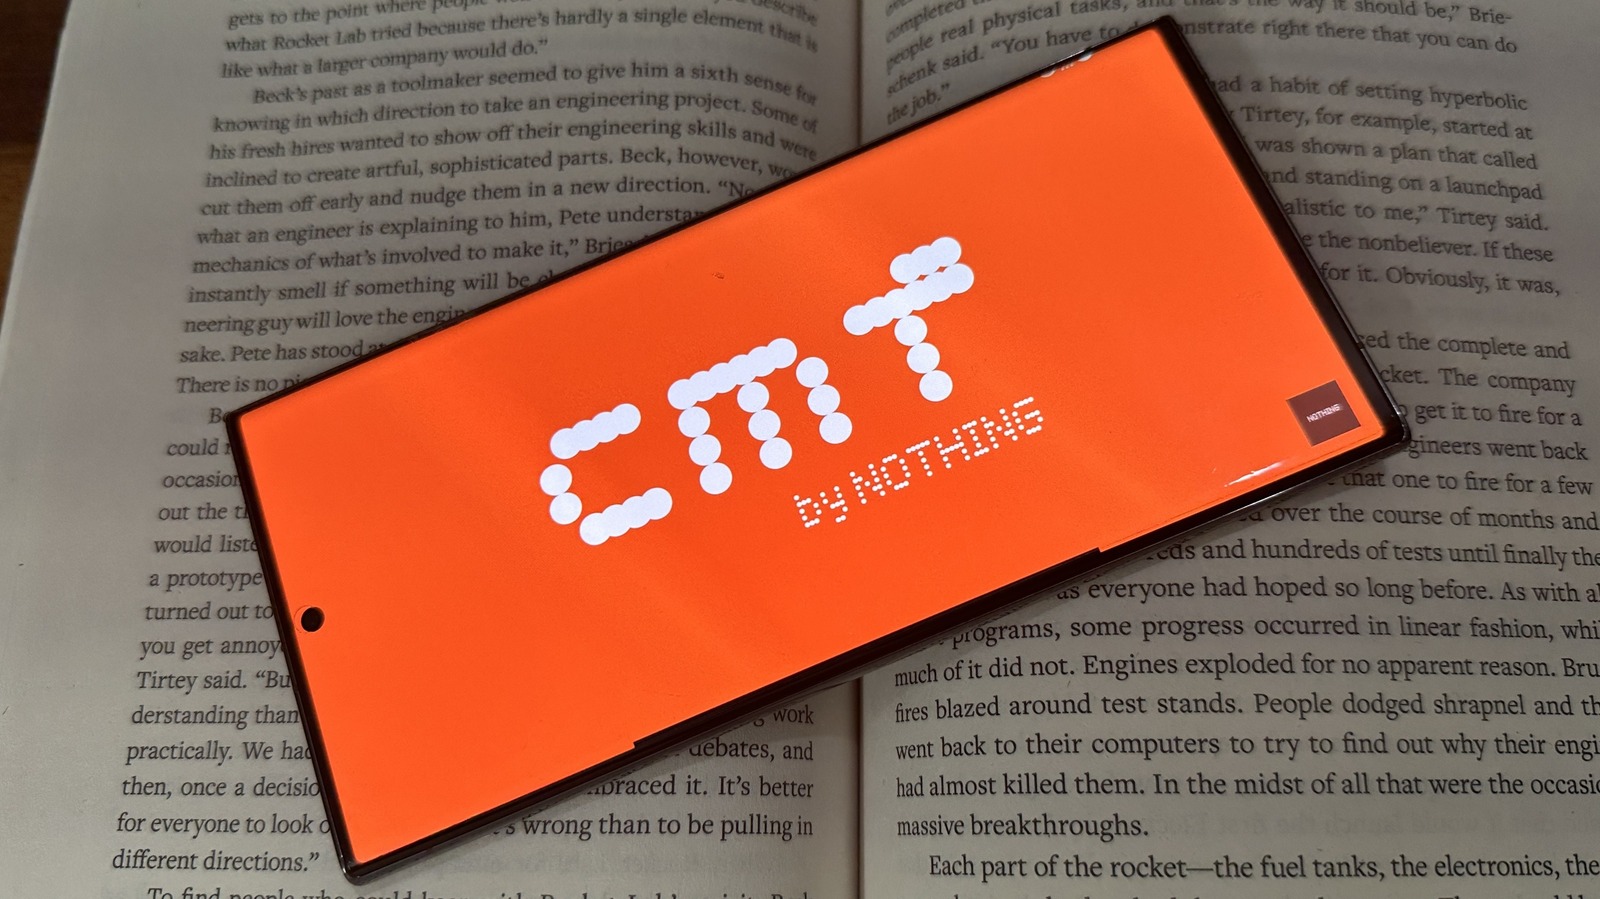 nothing CMF democratizes tech with earbuds, smartwatch & charger